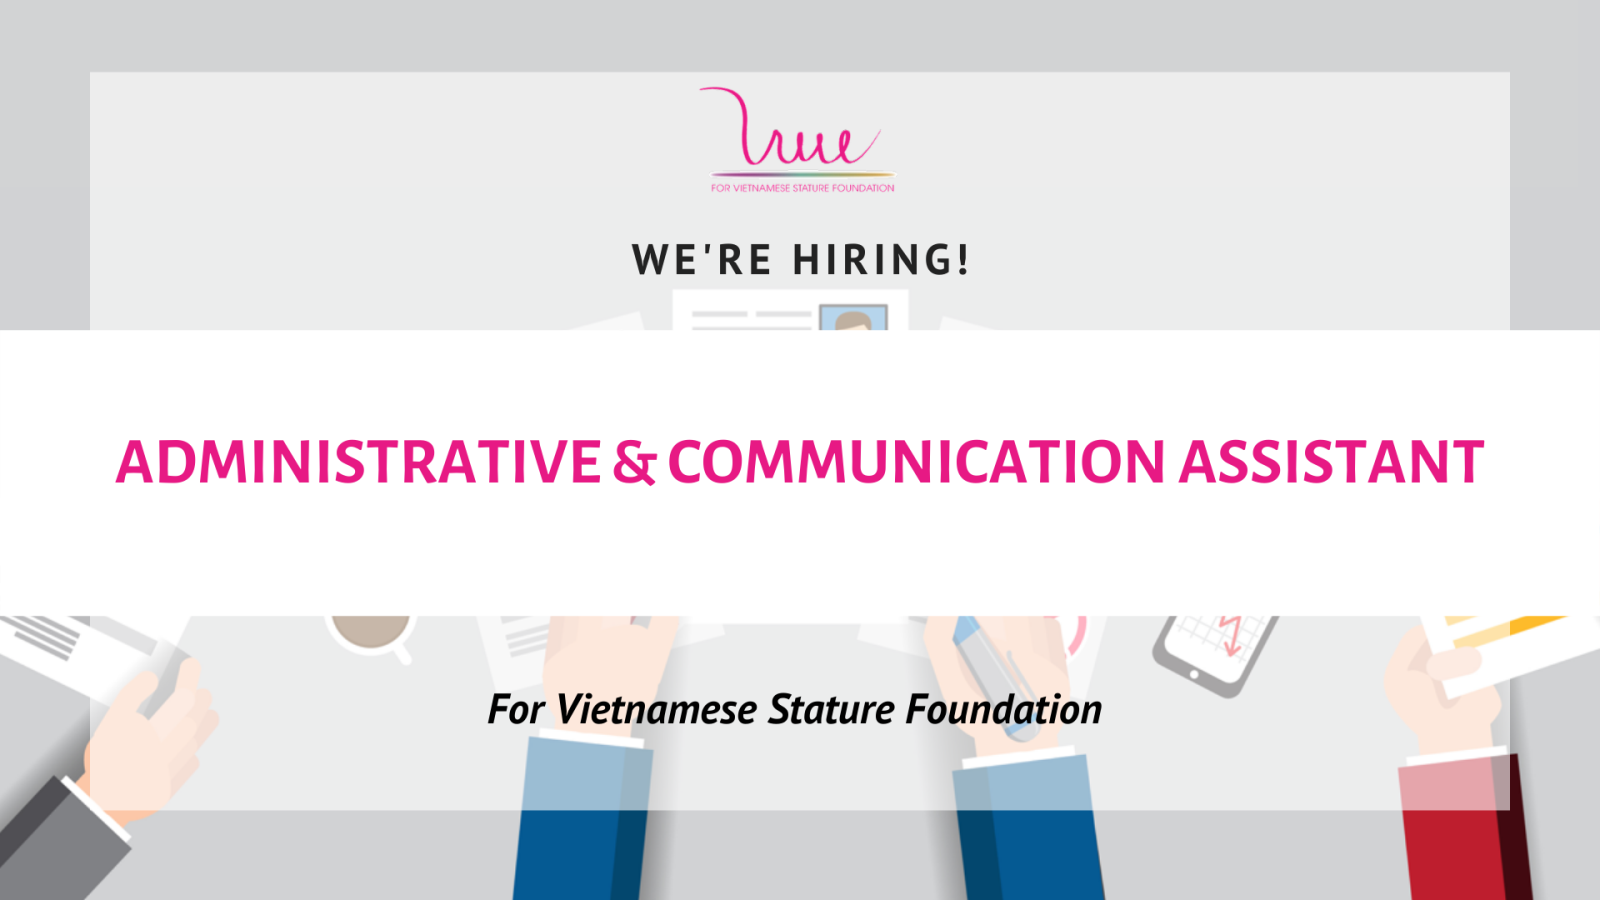 For Vietnamese Stature Foundation recruits Communication and Administrative Interns (Dec 2020)